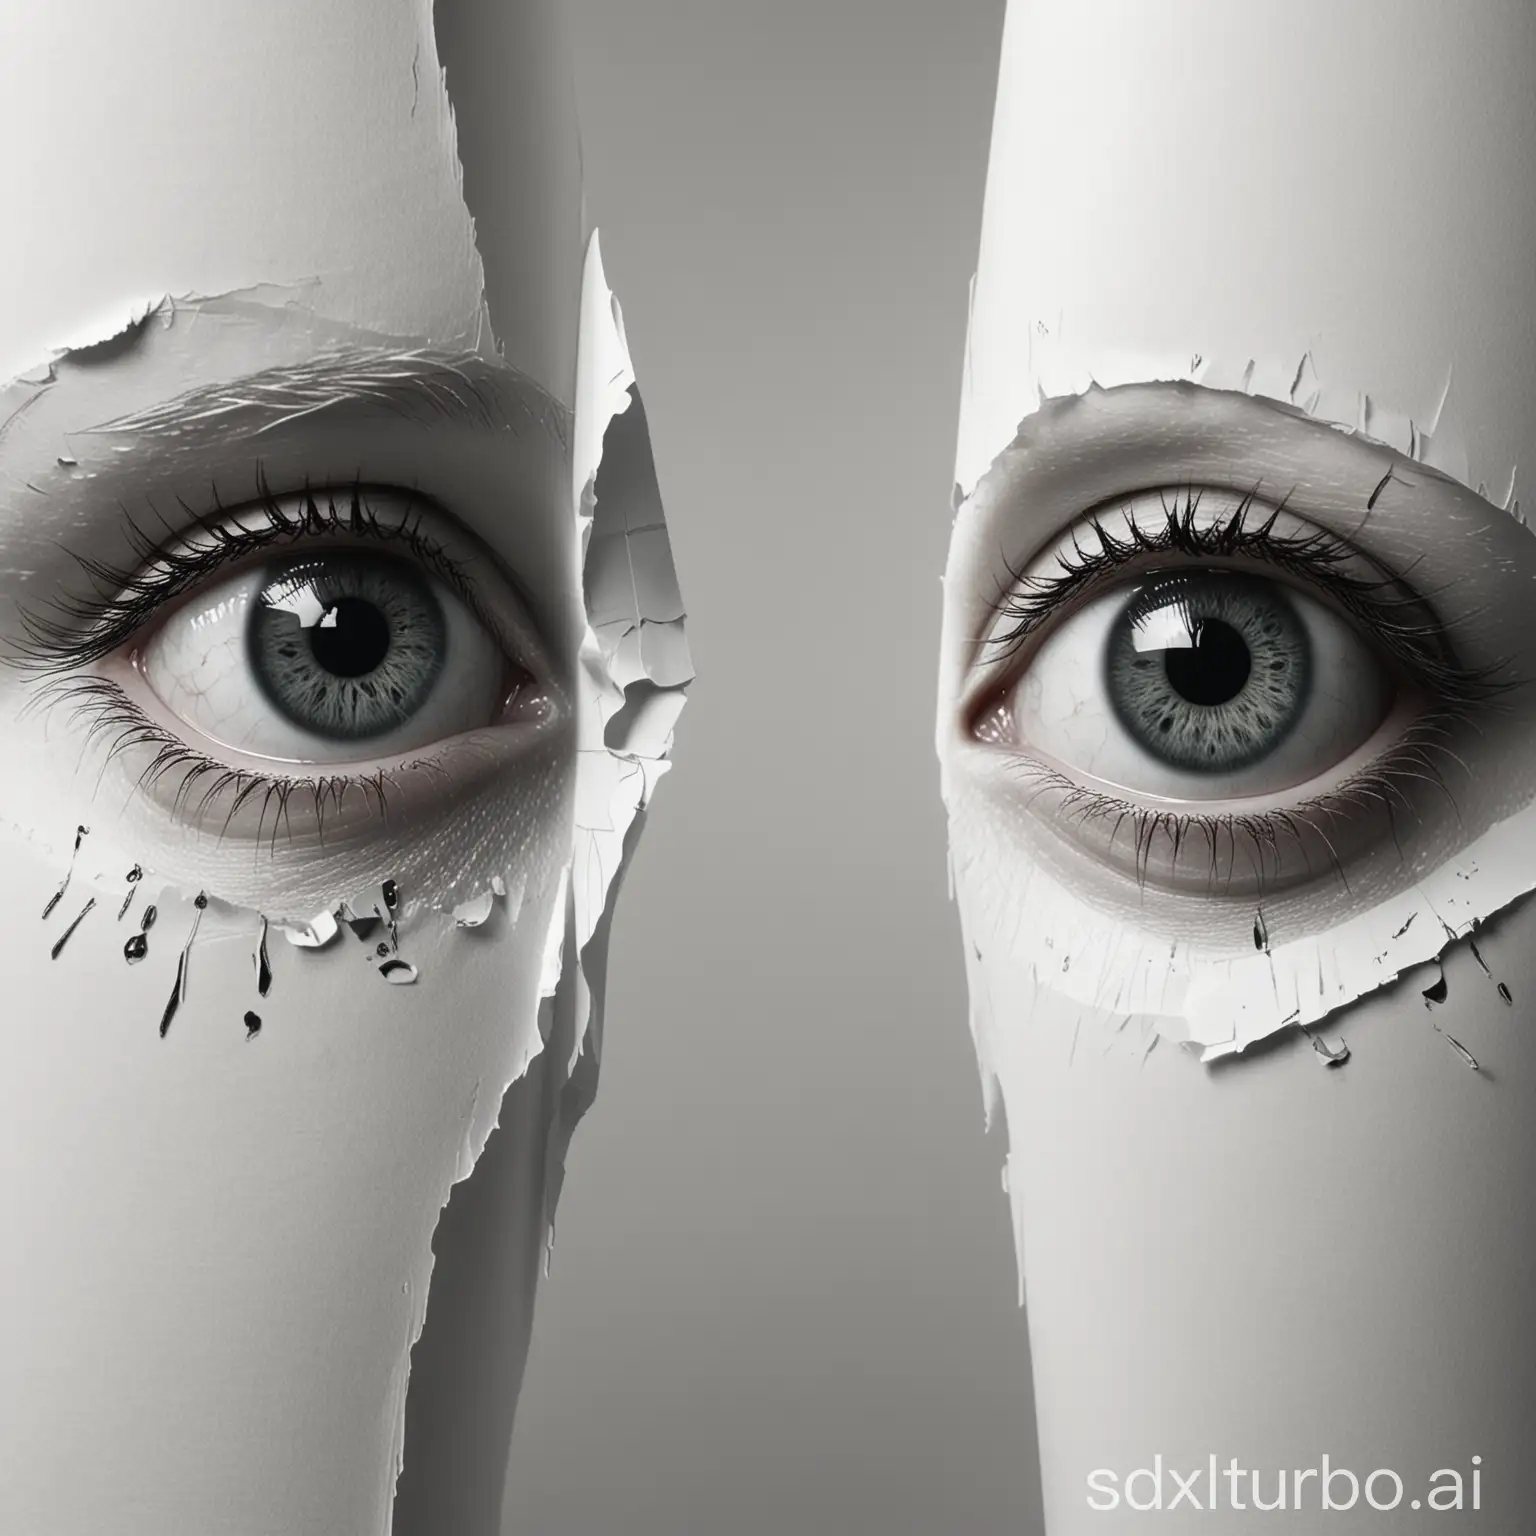 a tearing sheet of paper. 2 eyes, one human e another robotic eye, side by side, a robotic eye, would appear in that tear